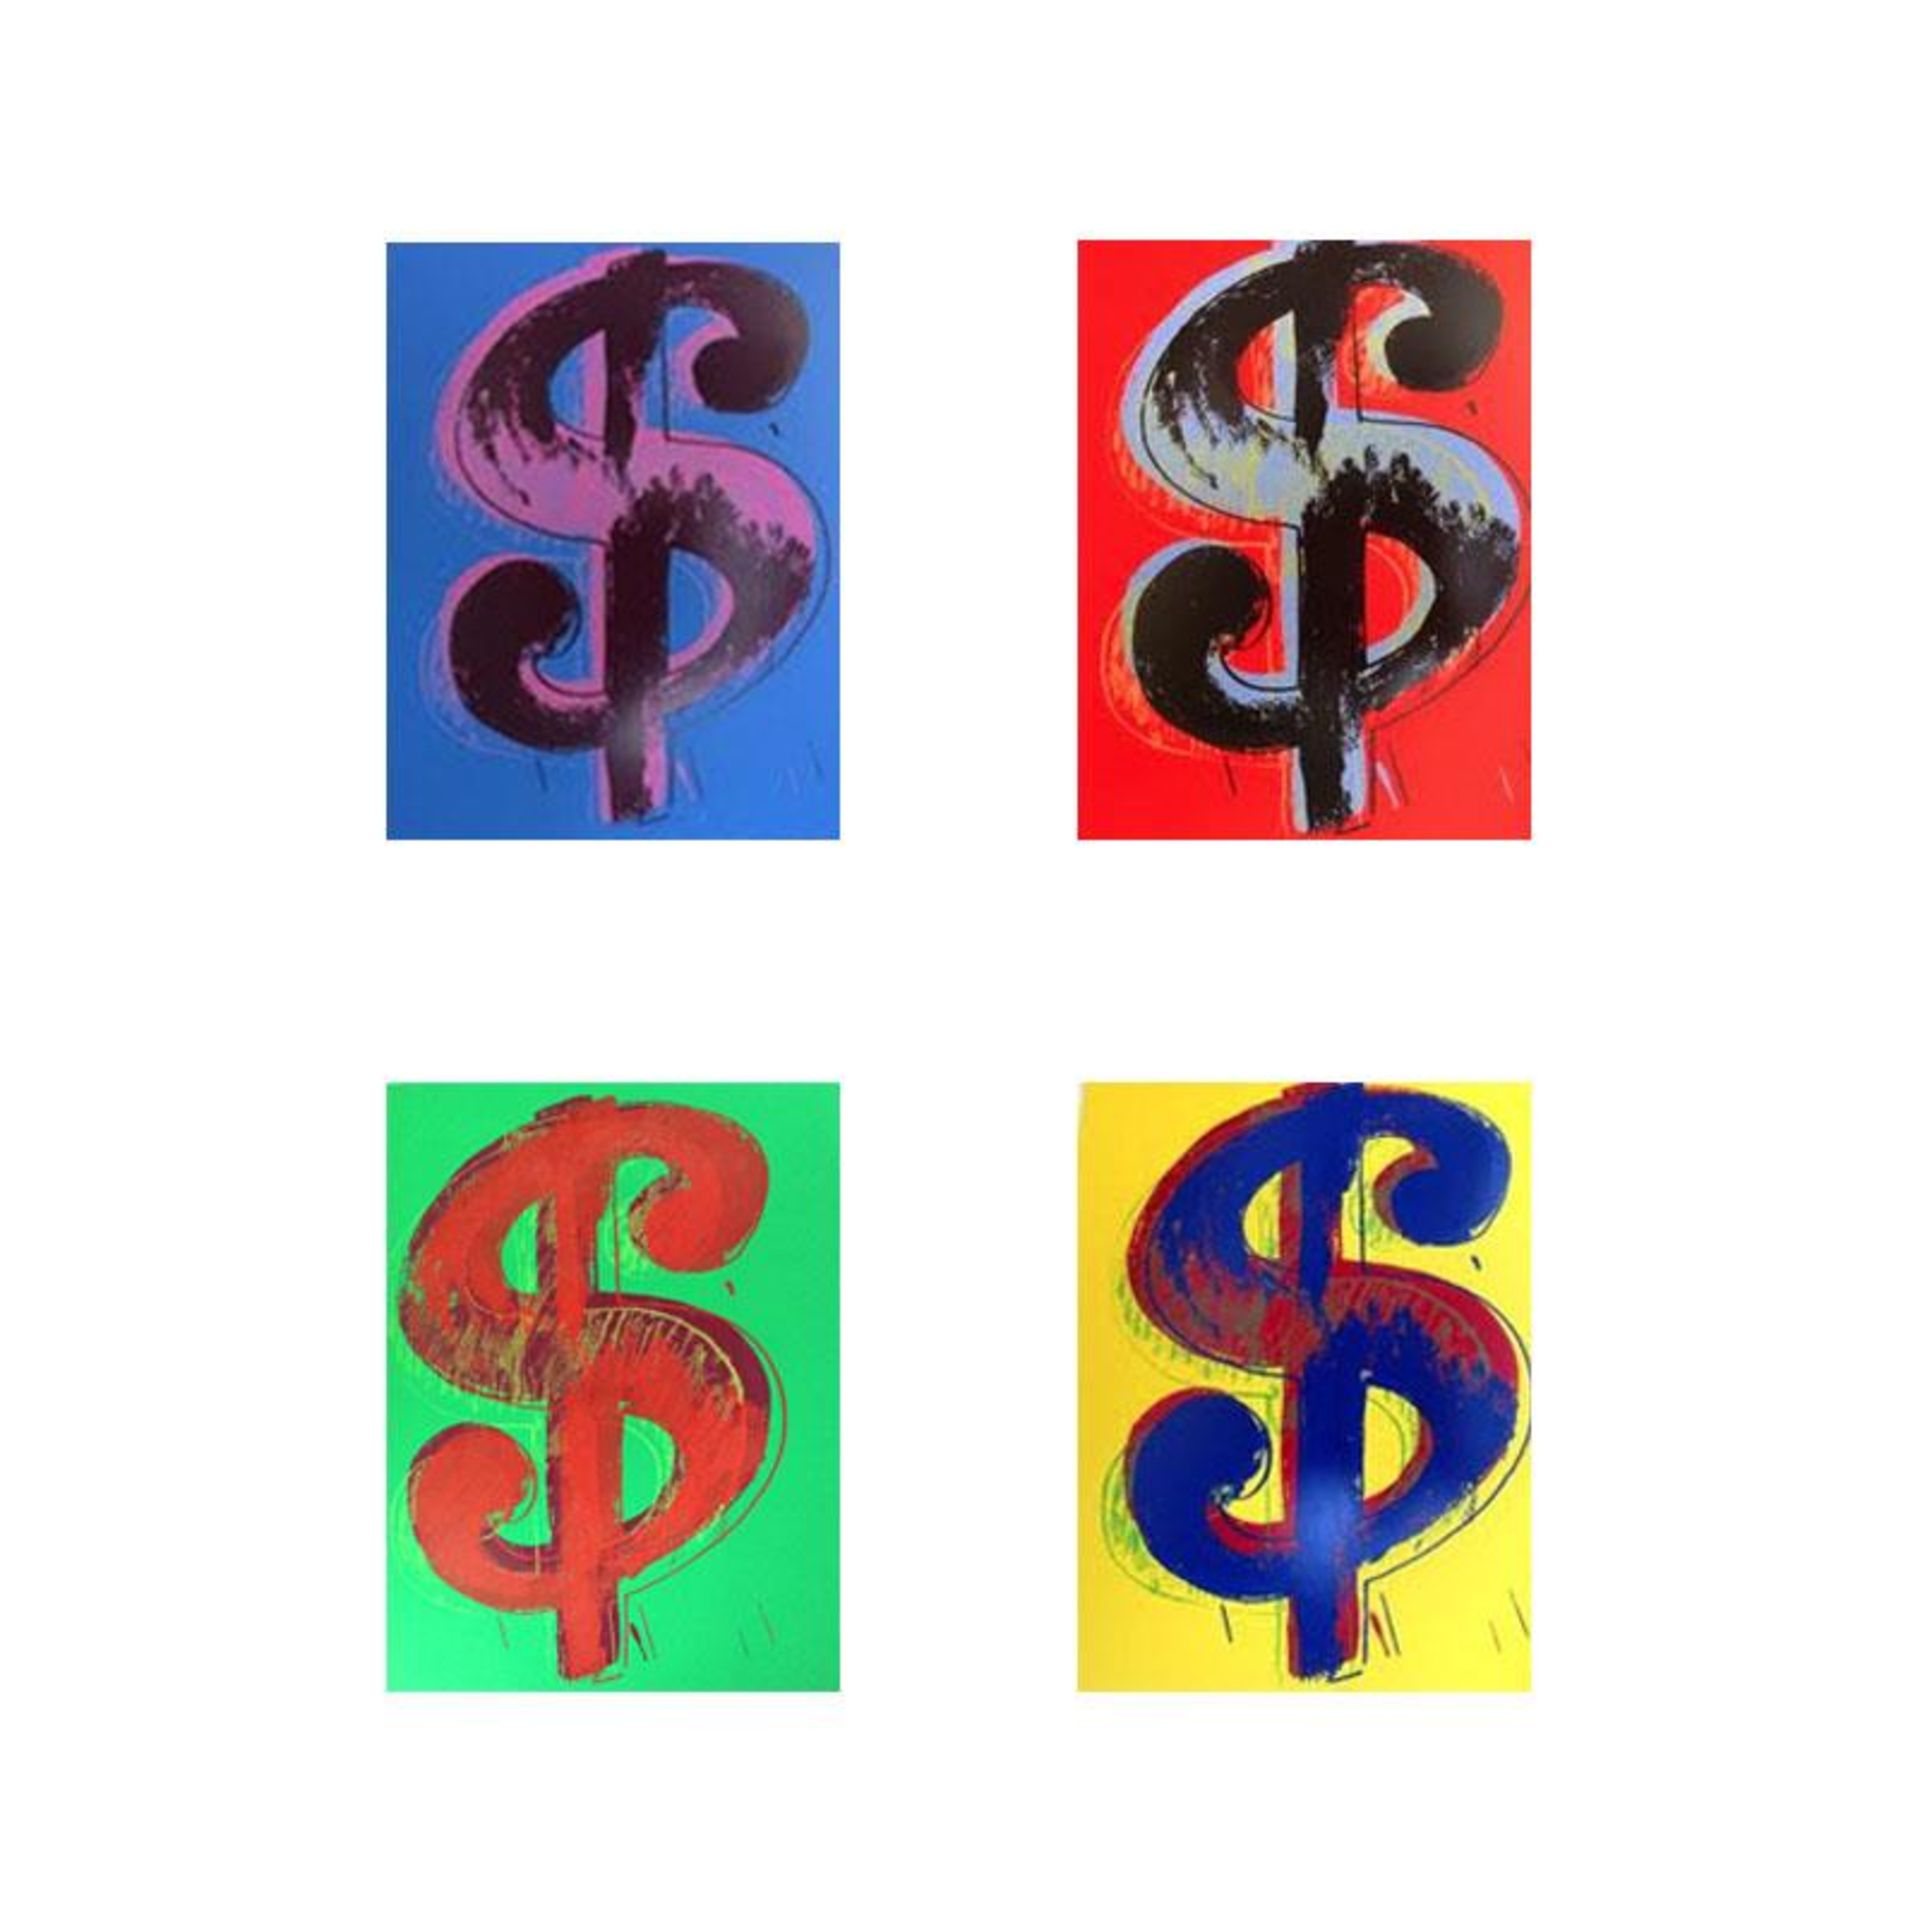 Andy Warhol "$ (Dollar signs)" Limited Edition Suite of 4 Silk Screen Prints fro